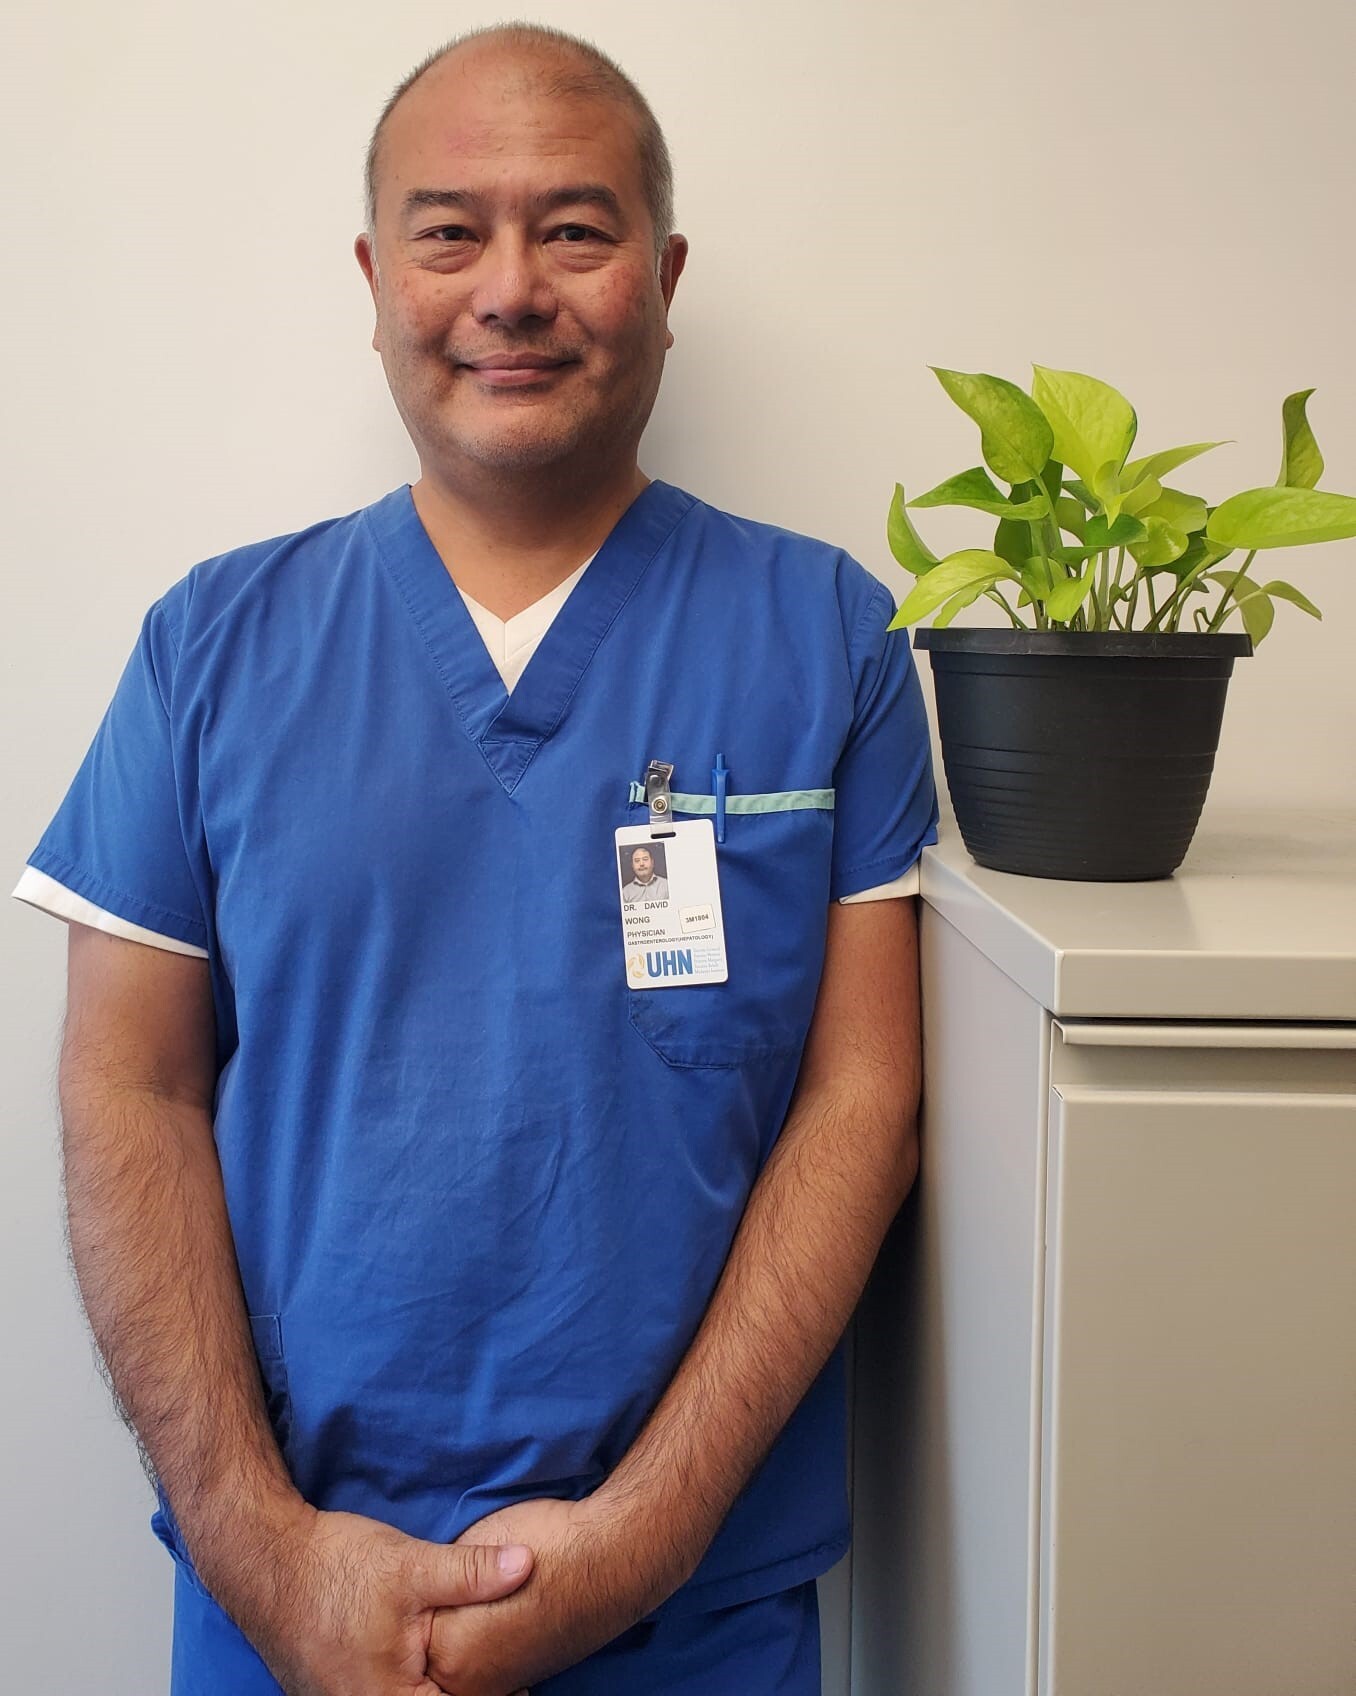 A smiling Dr. David Wong wearing blue scrubs while standing next to a leafy plant on a filing cabinet.